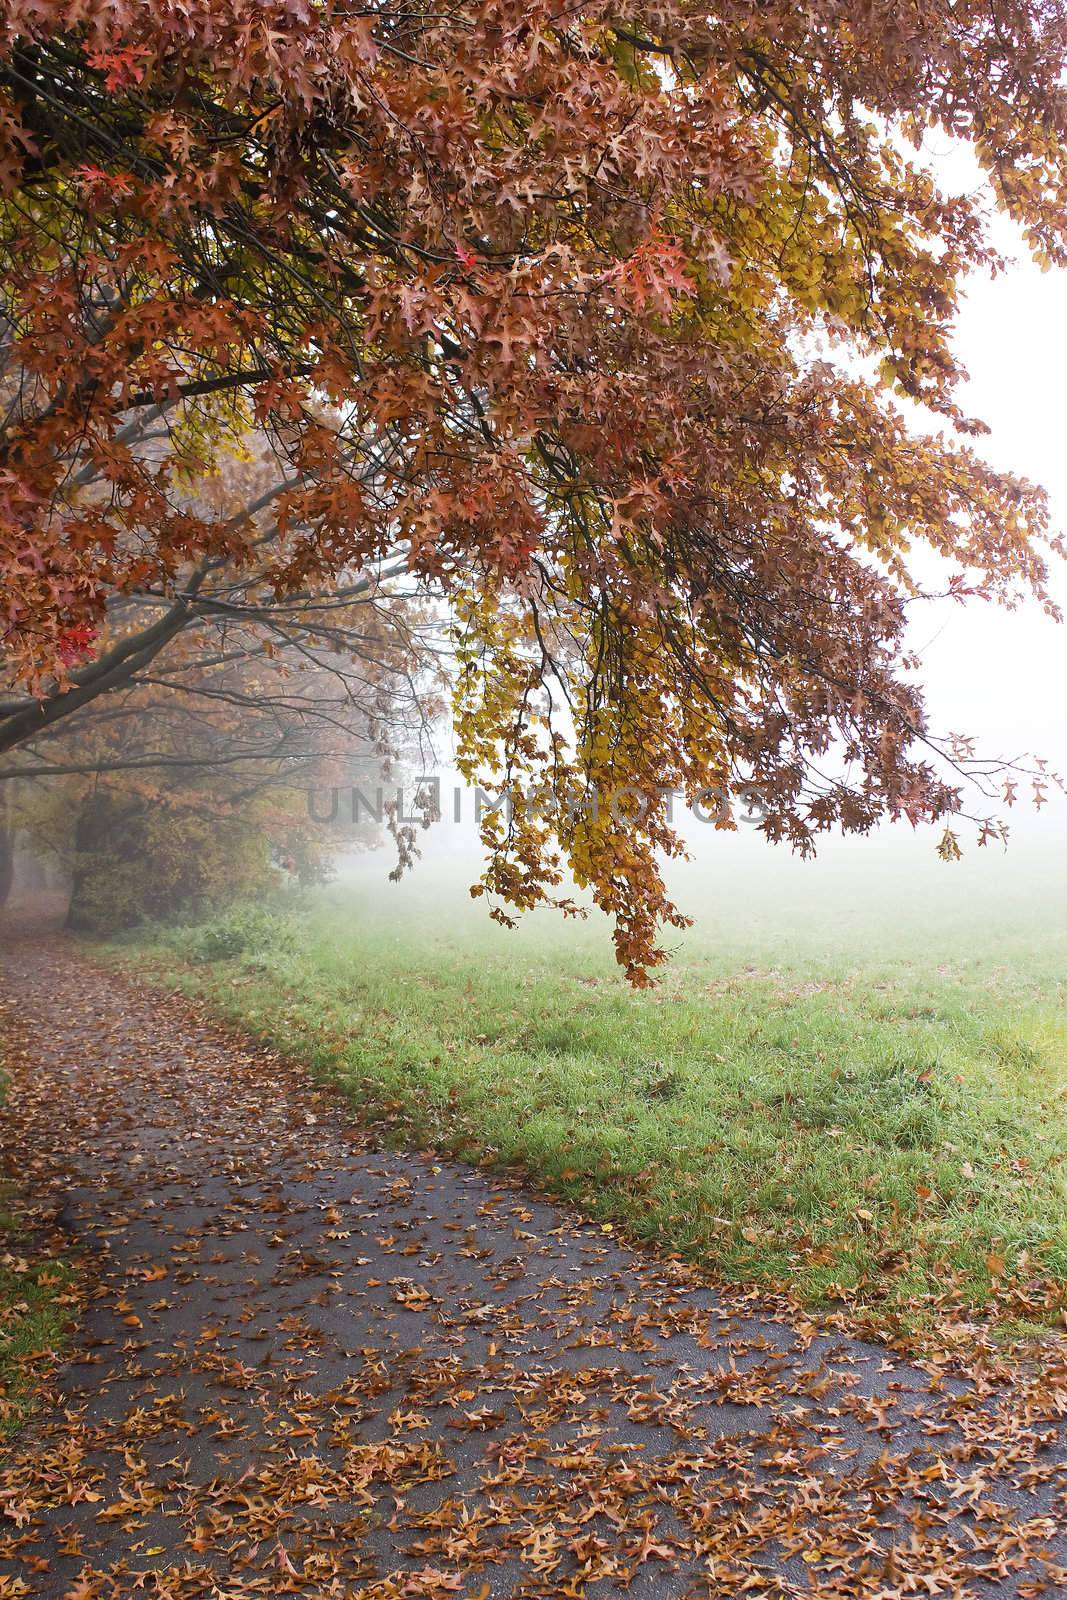 early autumn foggy morning in the park by miradrozdowski